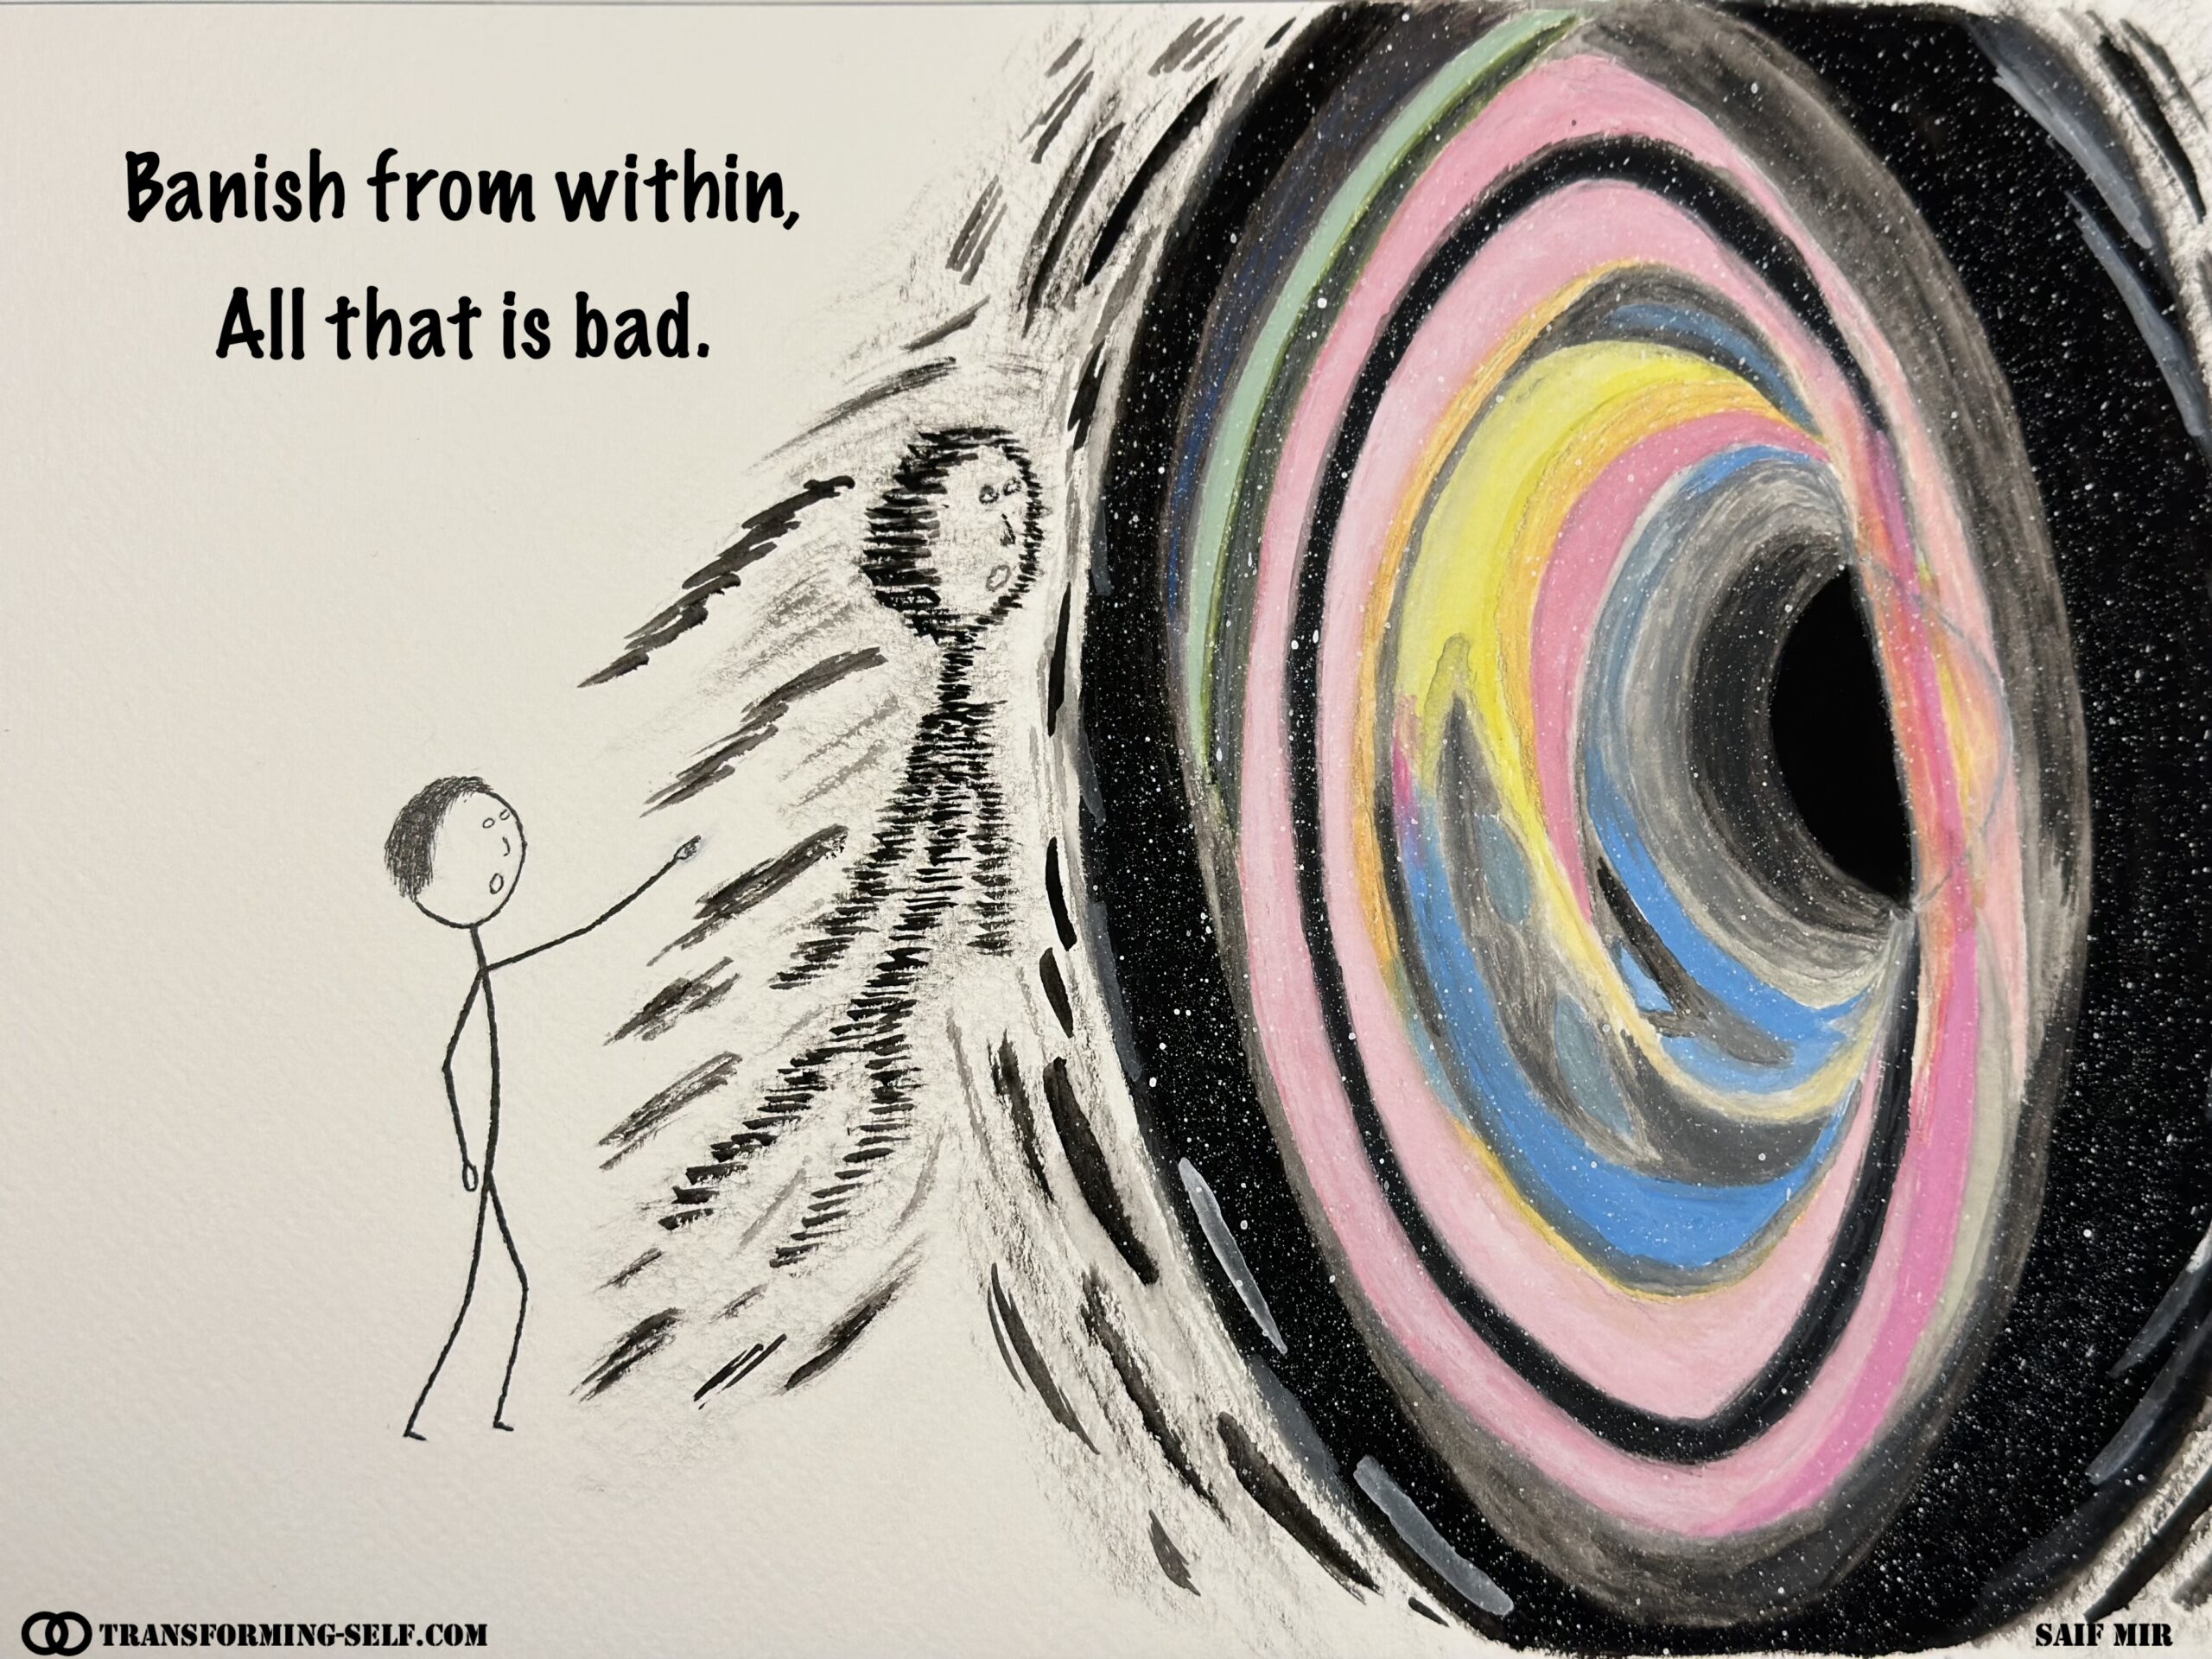 Banish from within, all that is bad